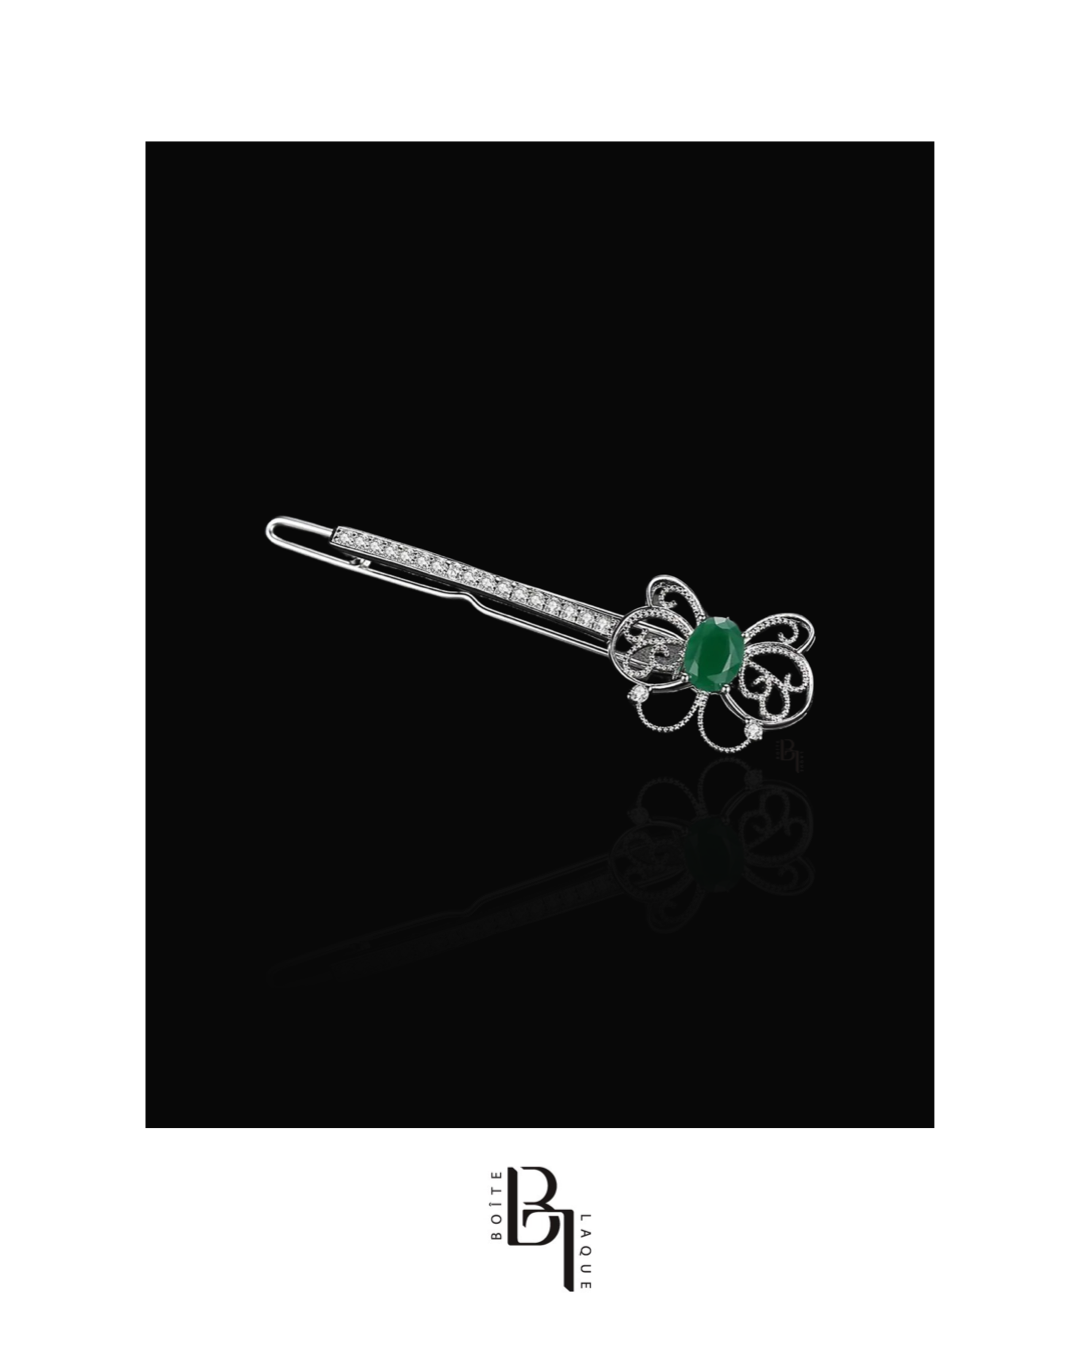 Emerald Bow 14k White Gold Hair Pin with Set of Signature Silver Bobby Pins